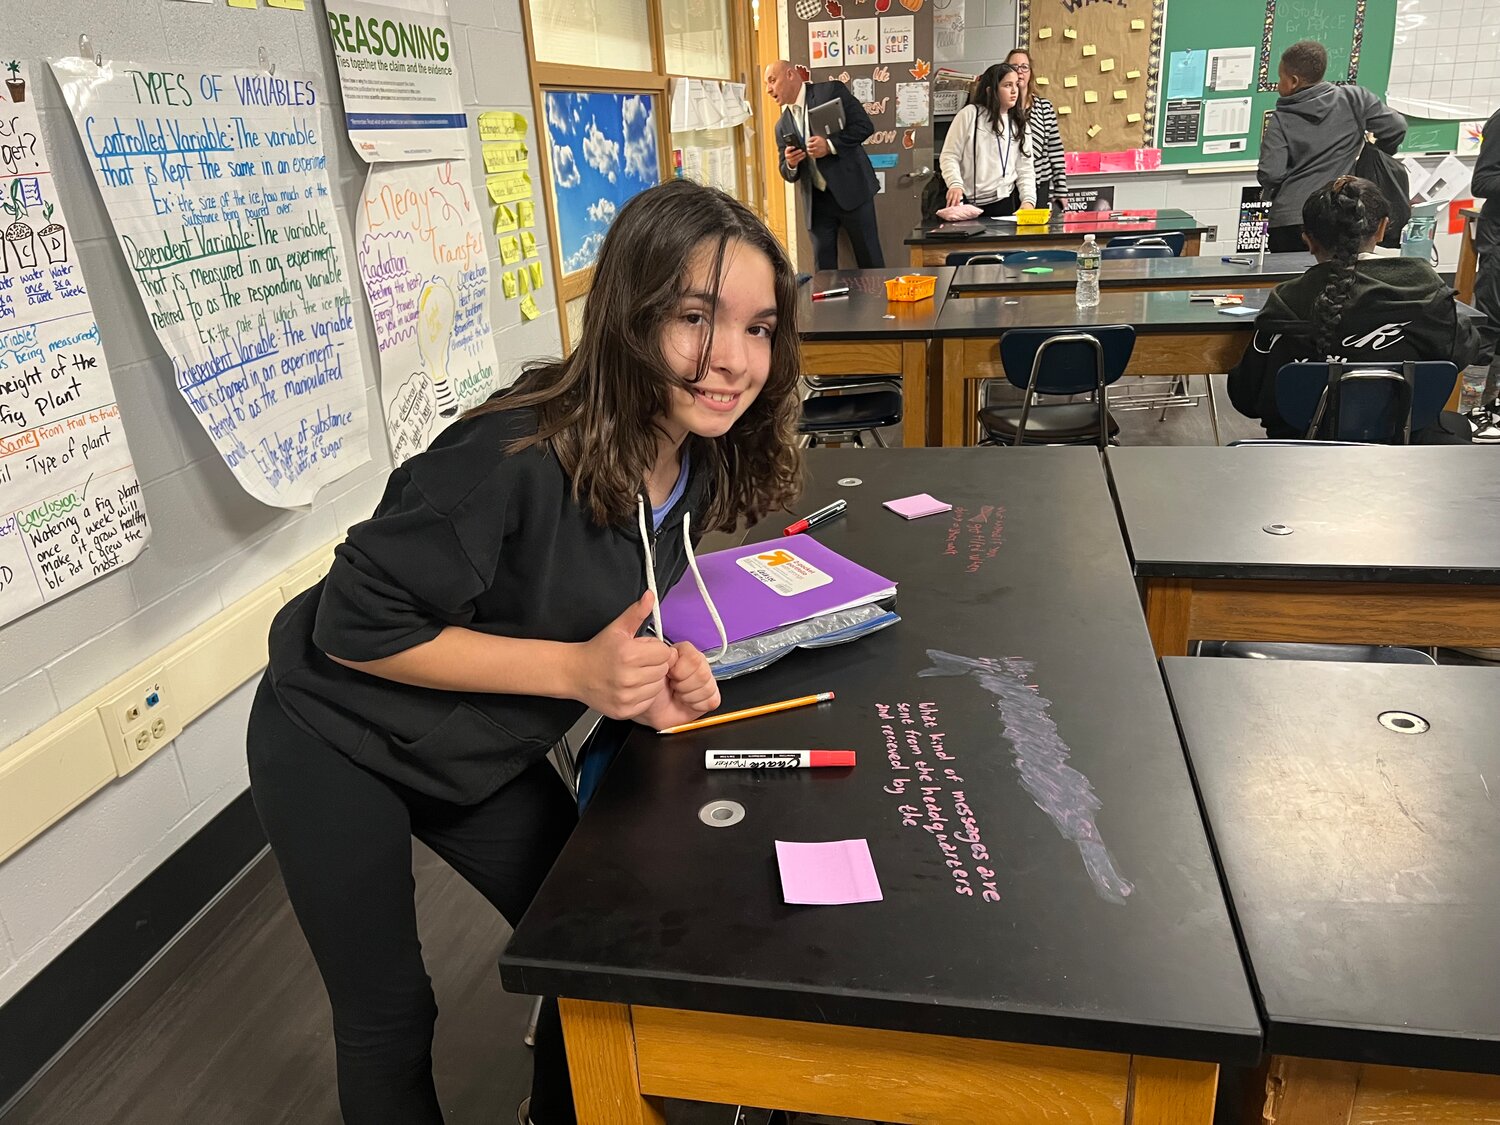 Baldwin Middle School sixth-grader Celeste Warner asked astronaut Jasmin Moghbeli a question through a pre-recorded video, which Moghbeli answered live from the International Space Station.